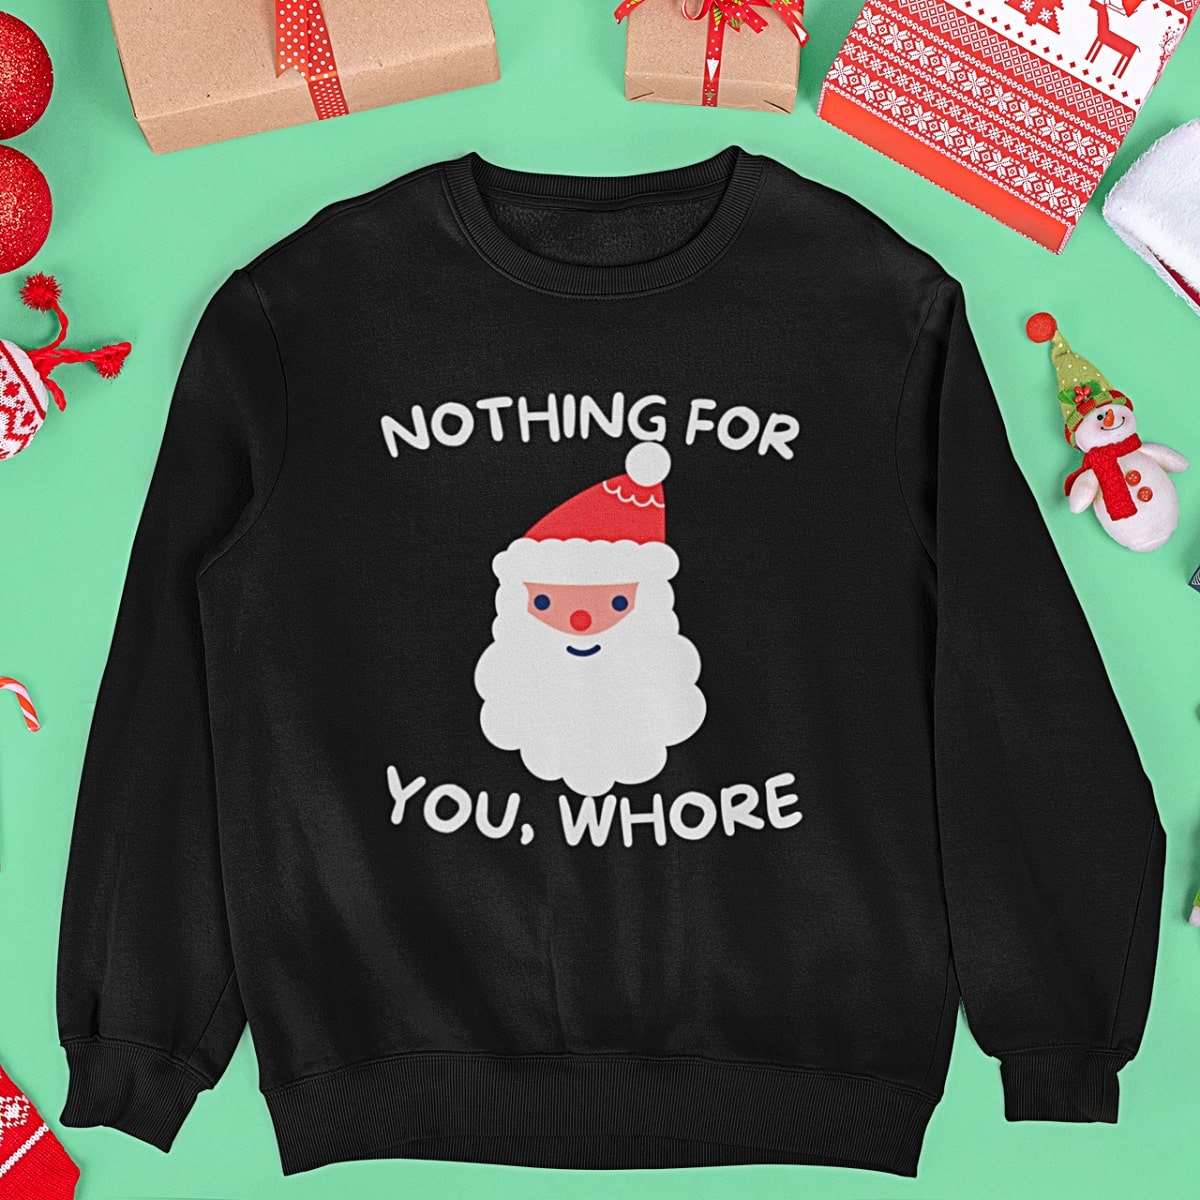 Nothing For You, Whore Funny Christmas Sweater - Santaland